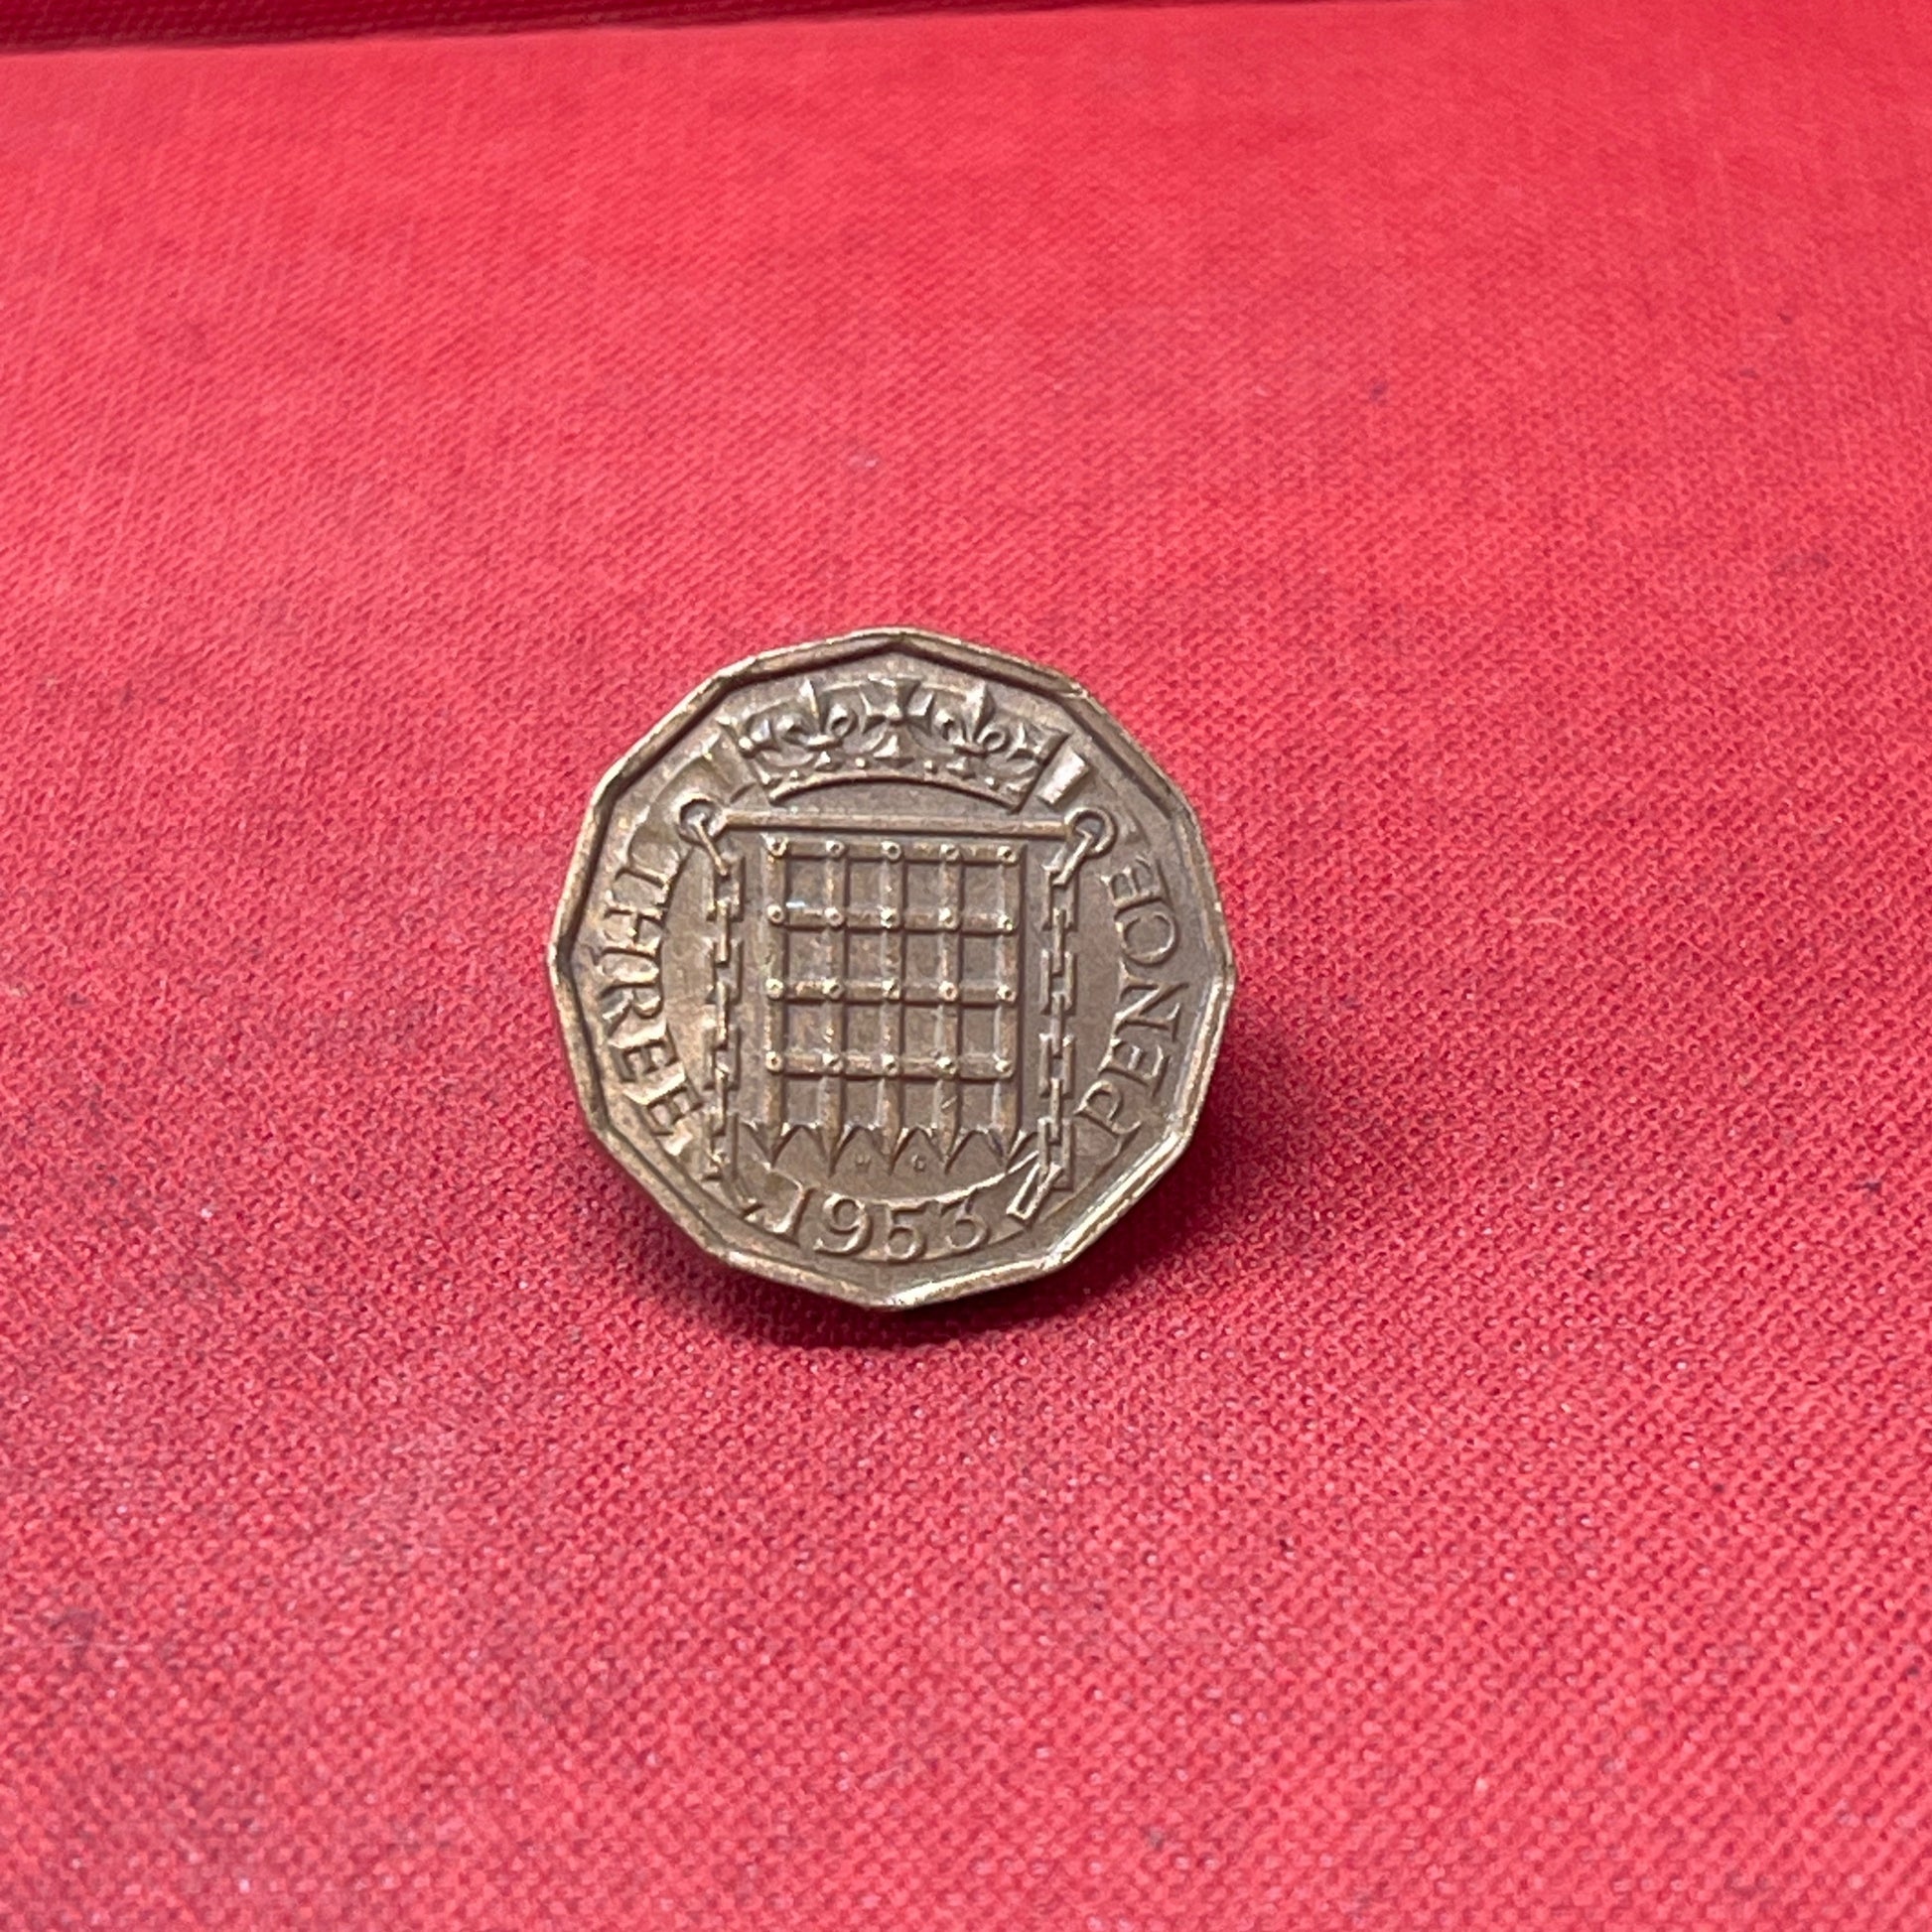 British  Threepence, Thruppence, or Thruppenny Bit